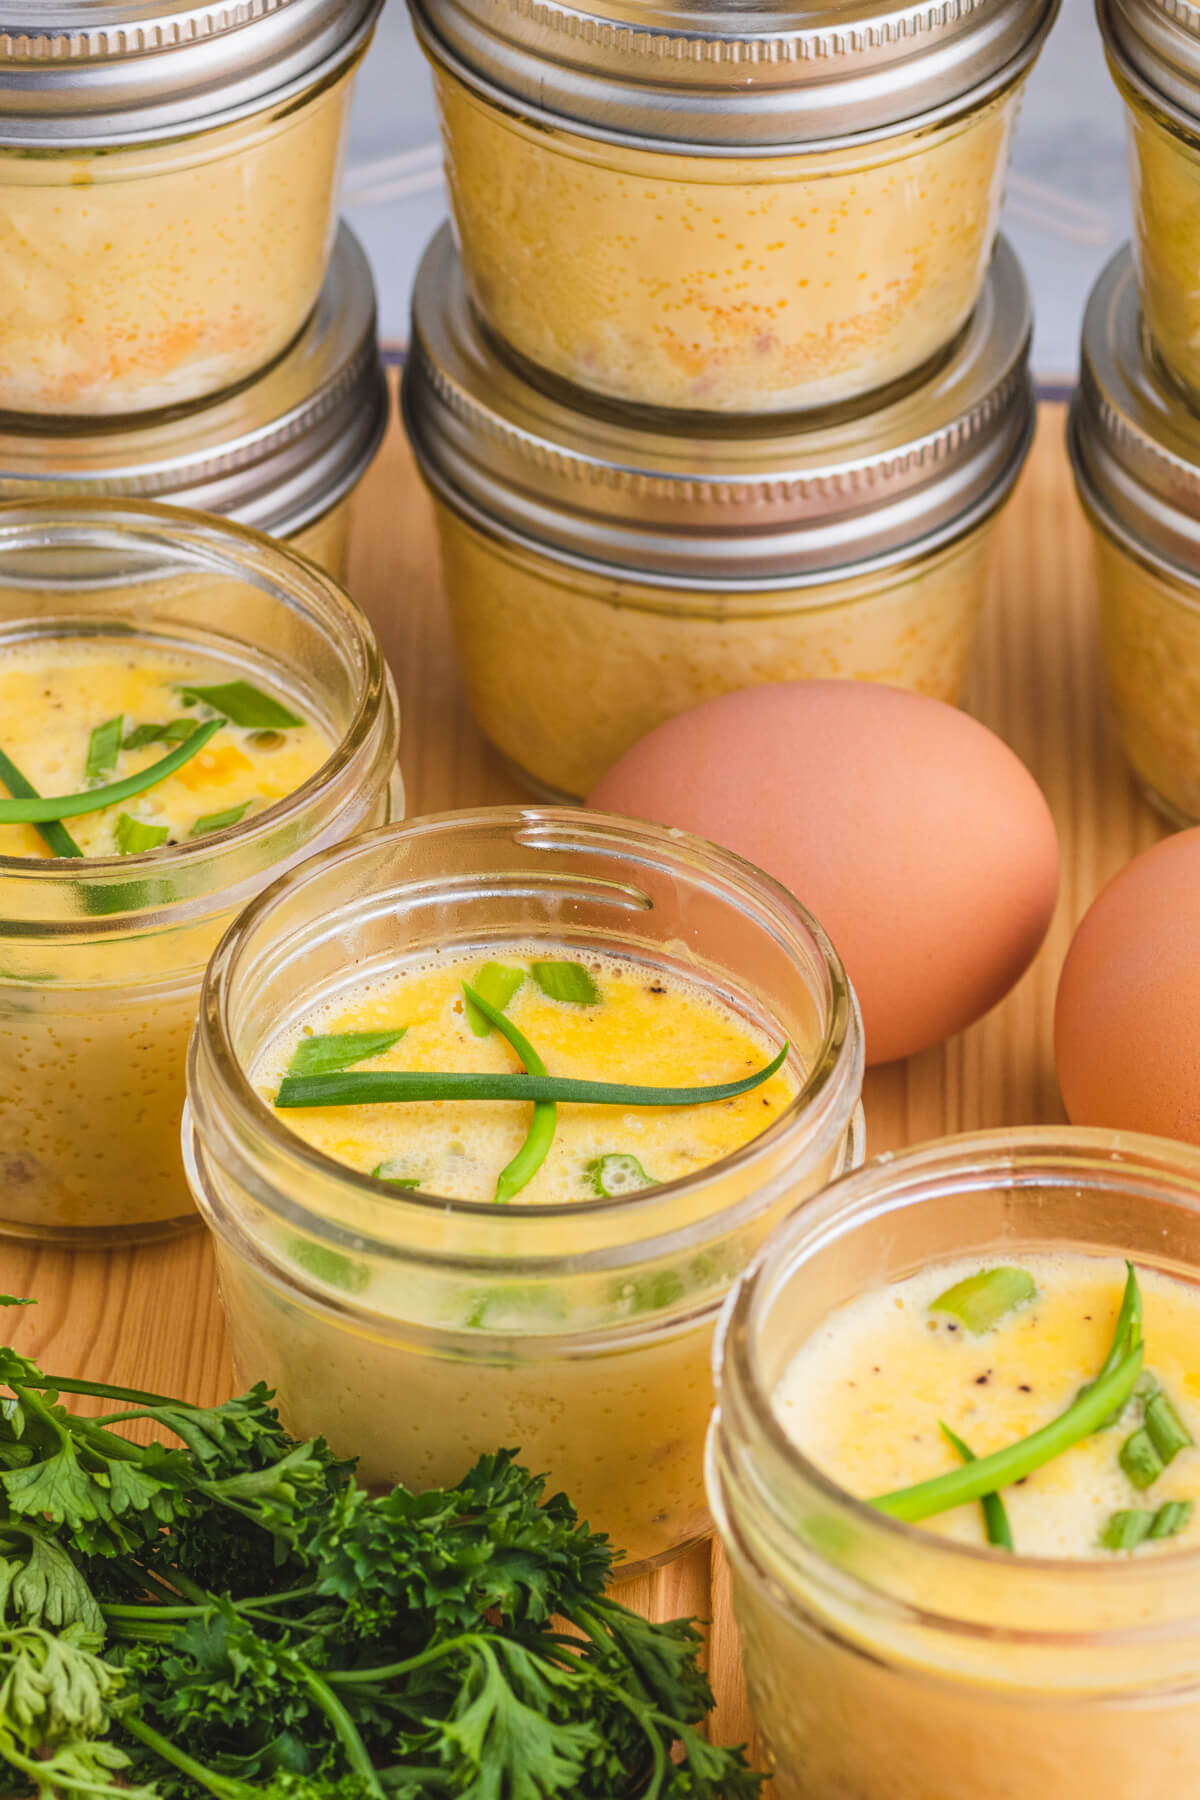 Three sous vide egg bites in glass jars surrounded by fresh parsley and brown eggs.